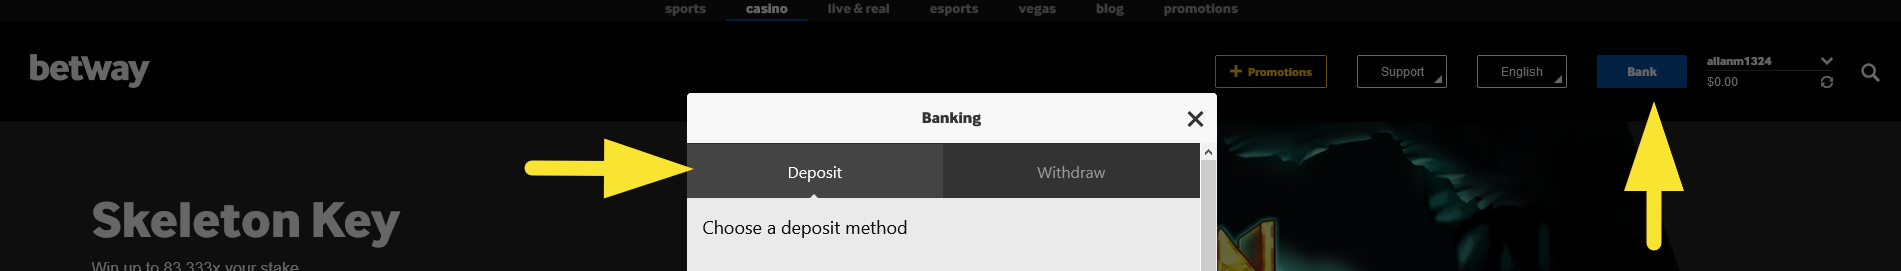 25 Of The Punniest betway mobile casino review Puns You Can Find